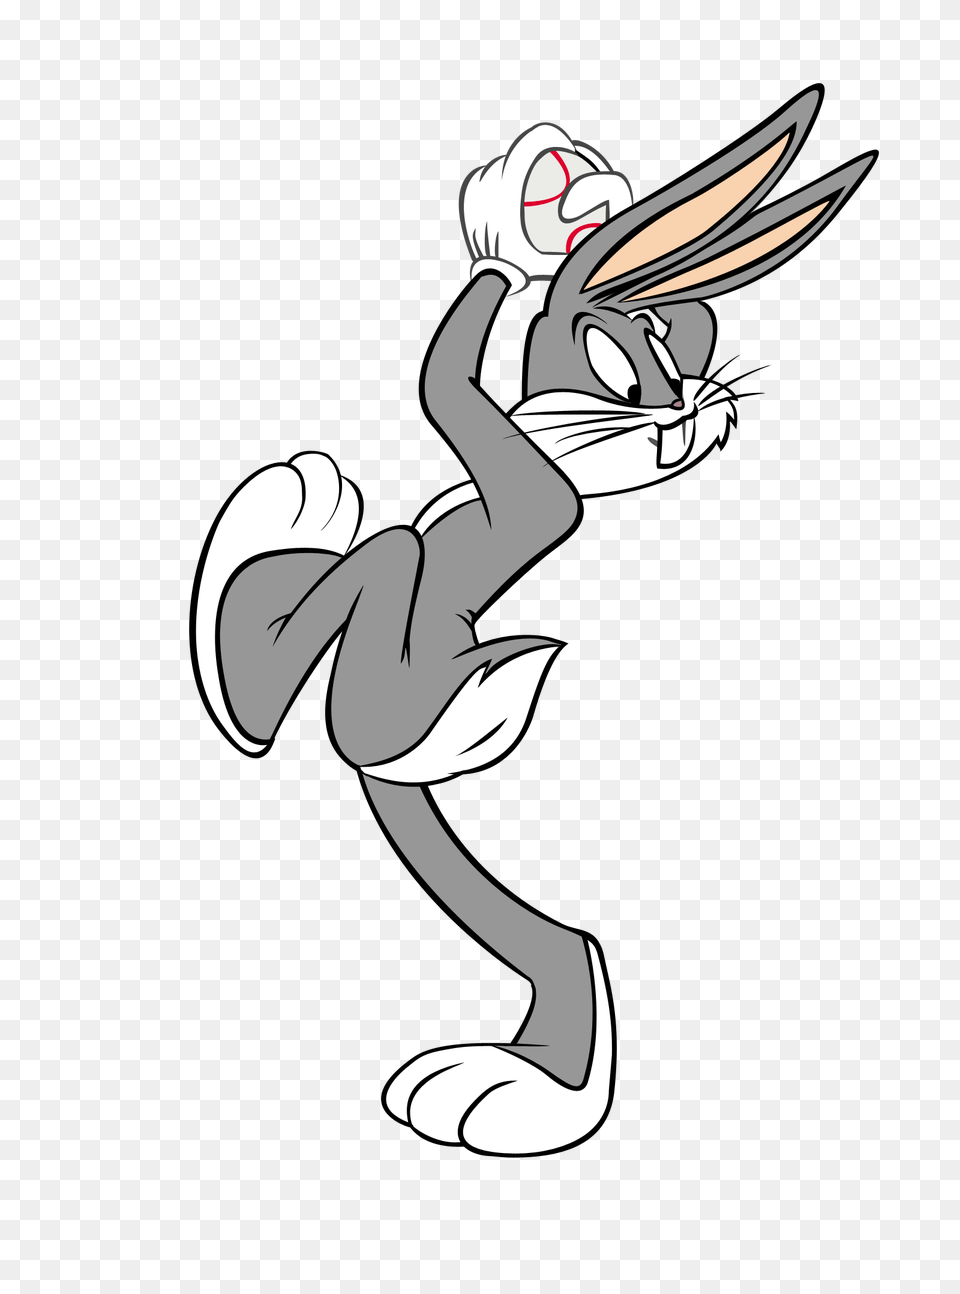 Check Out This Transparent Bugs Bunny Throwing A Baseball, Cartoon, Person, Book, Comics Png